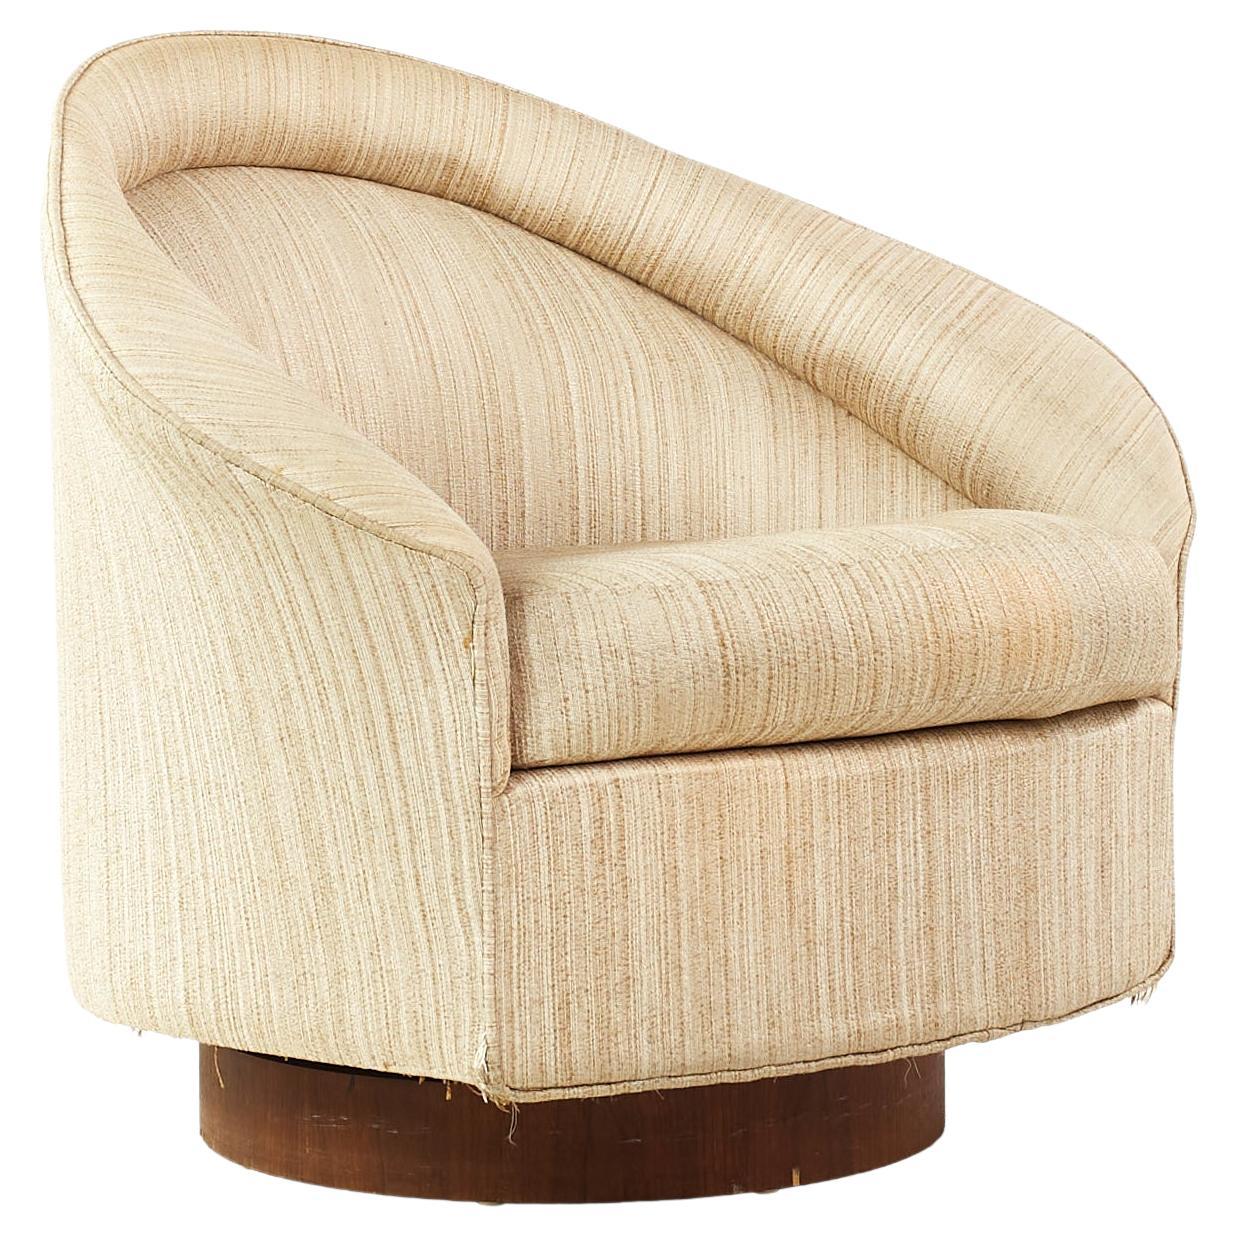 Adrian Pearsall for Craft Associates Mid-Century Swivel Lounge Chair